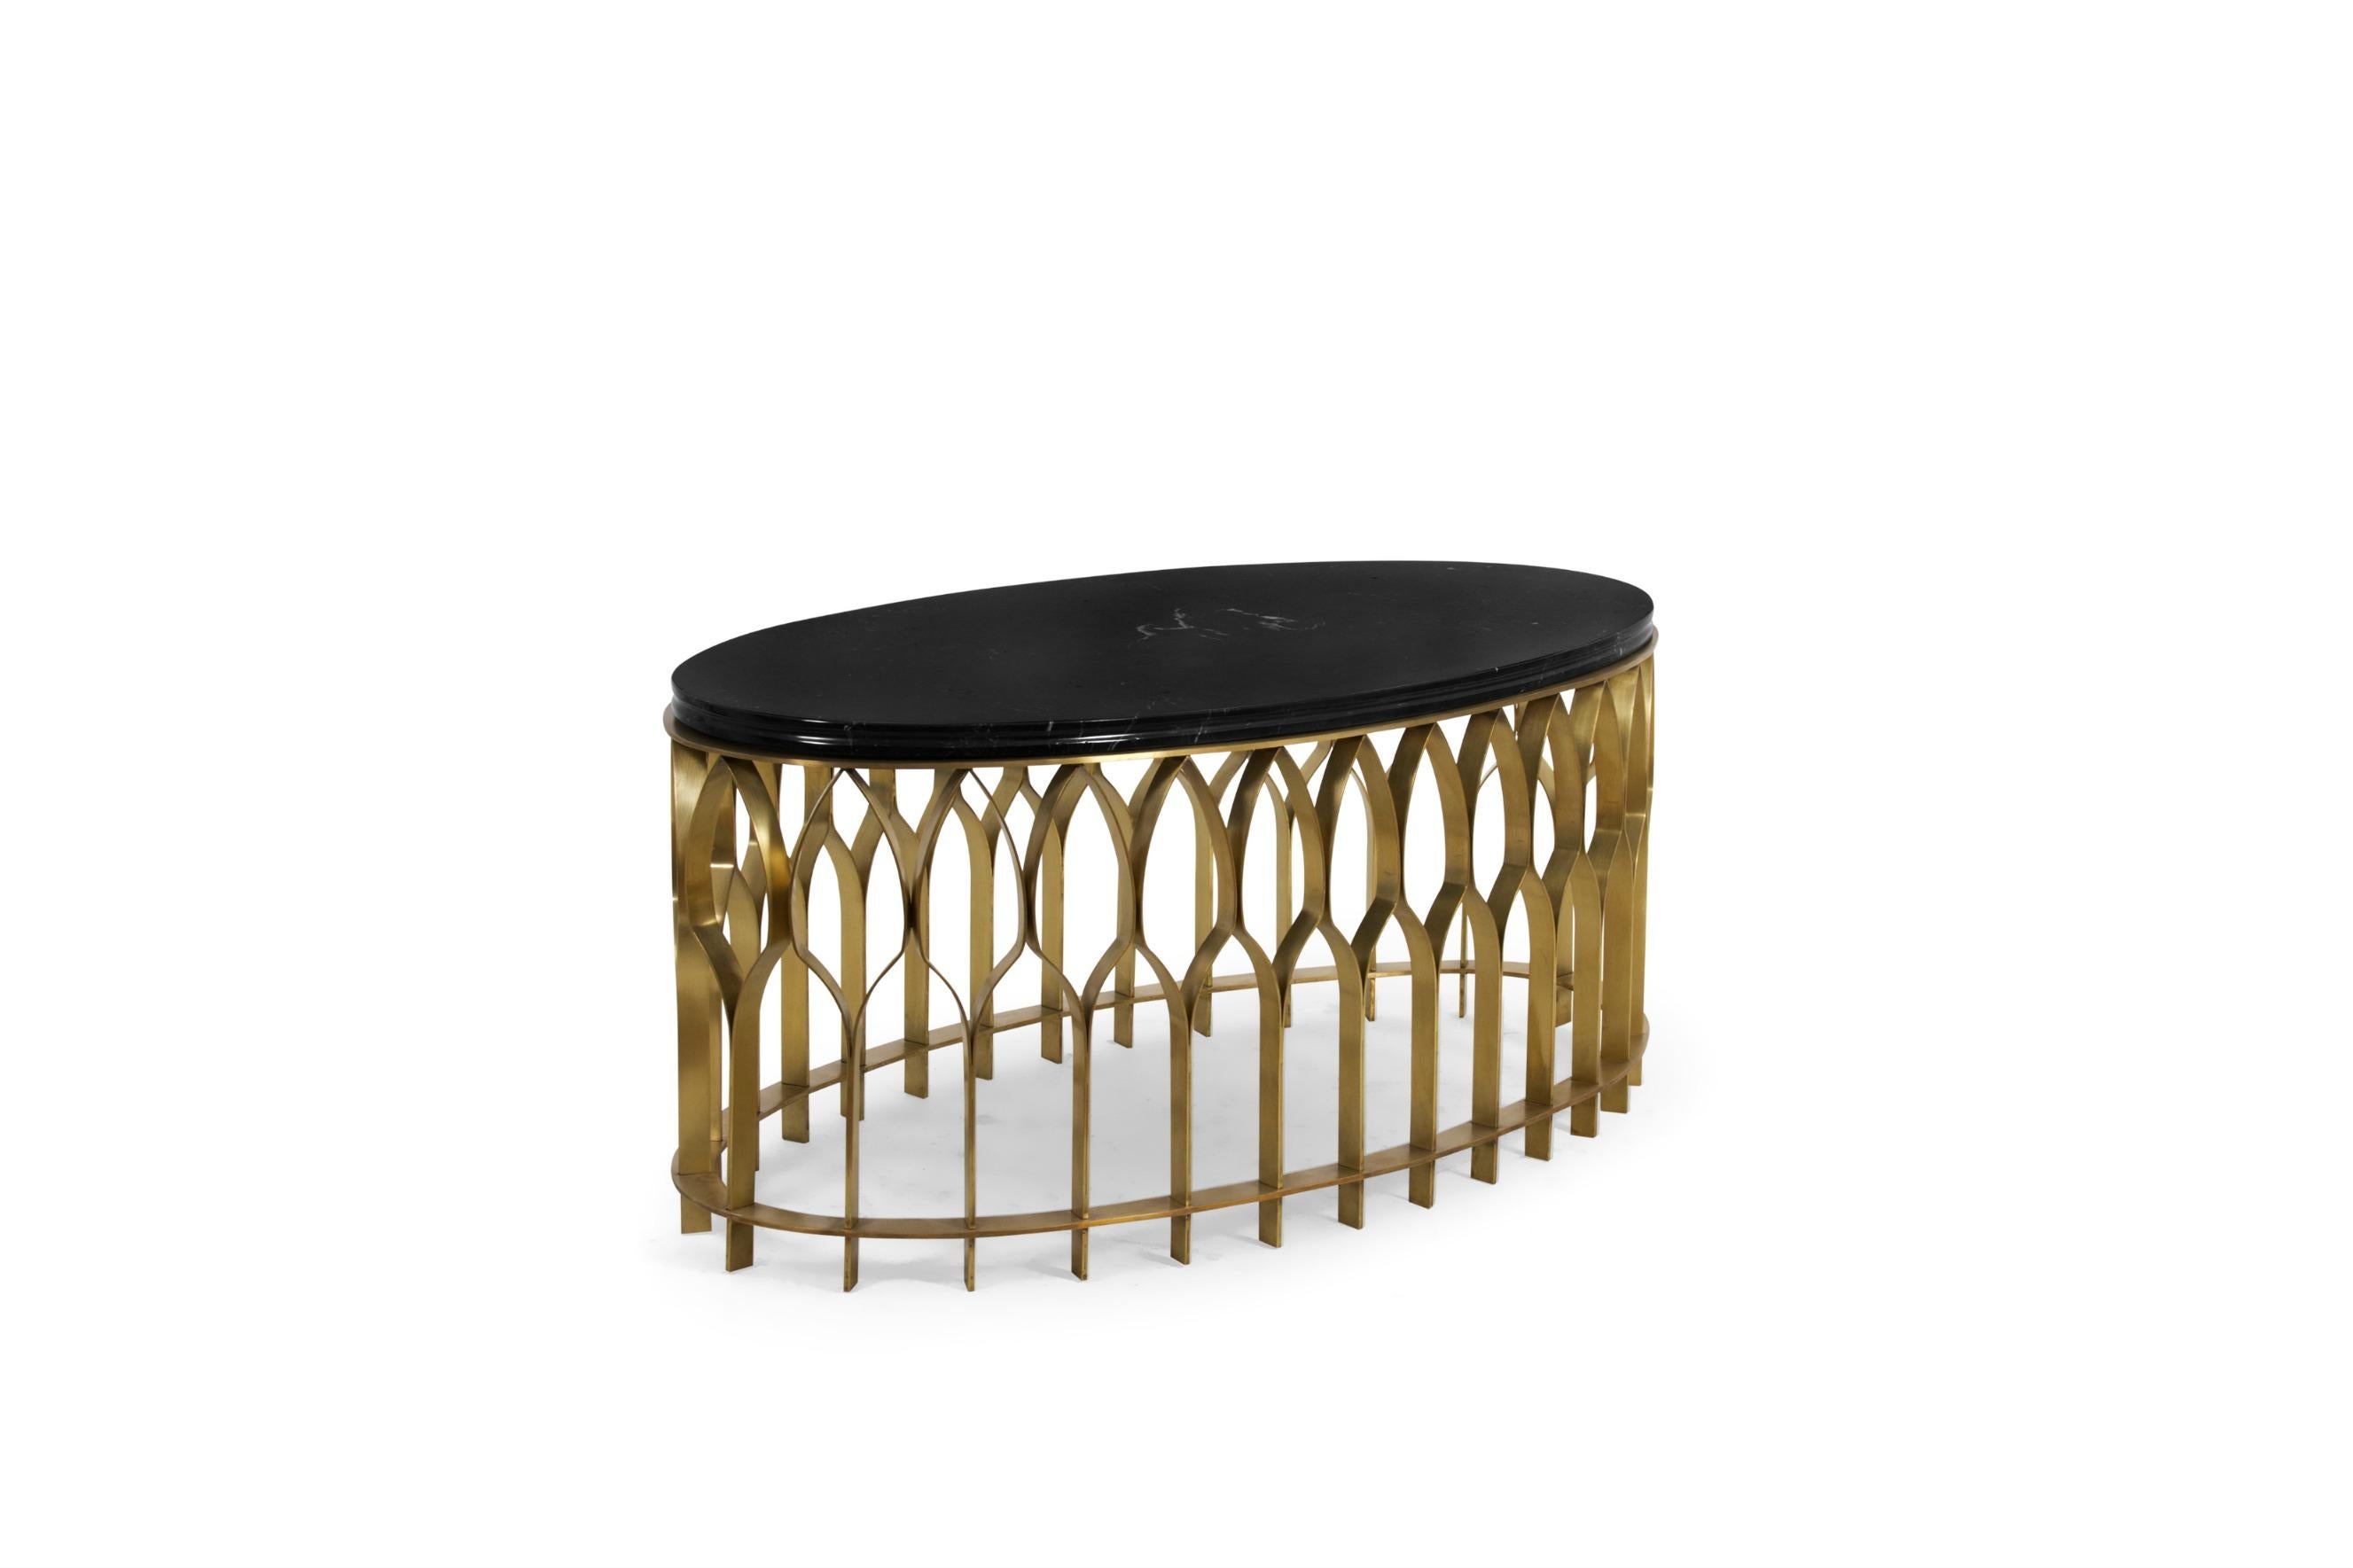 Mosques are not only places for the spiritual cult but also majestic architectural works. MECCA Center Table features brushed aged brass matte columns that resemble the architectural heritage from the mosques. This oval coffee table will enhance any